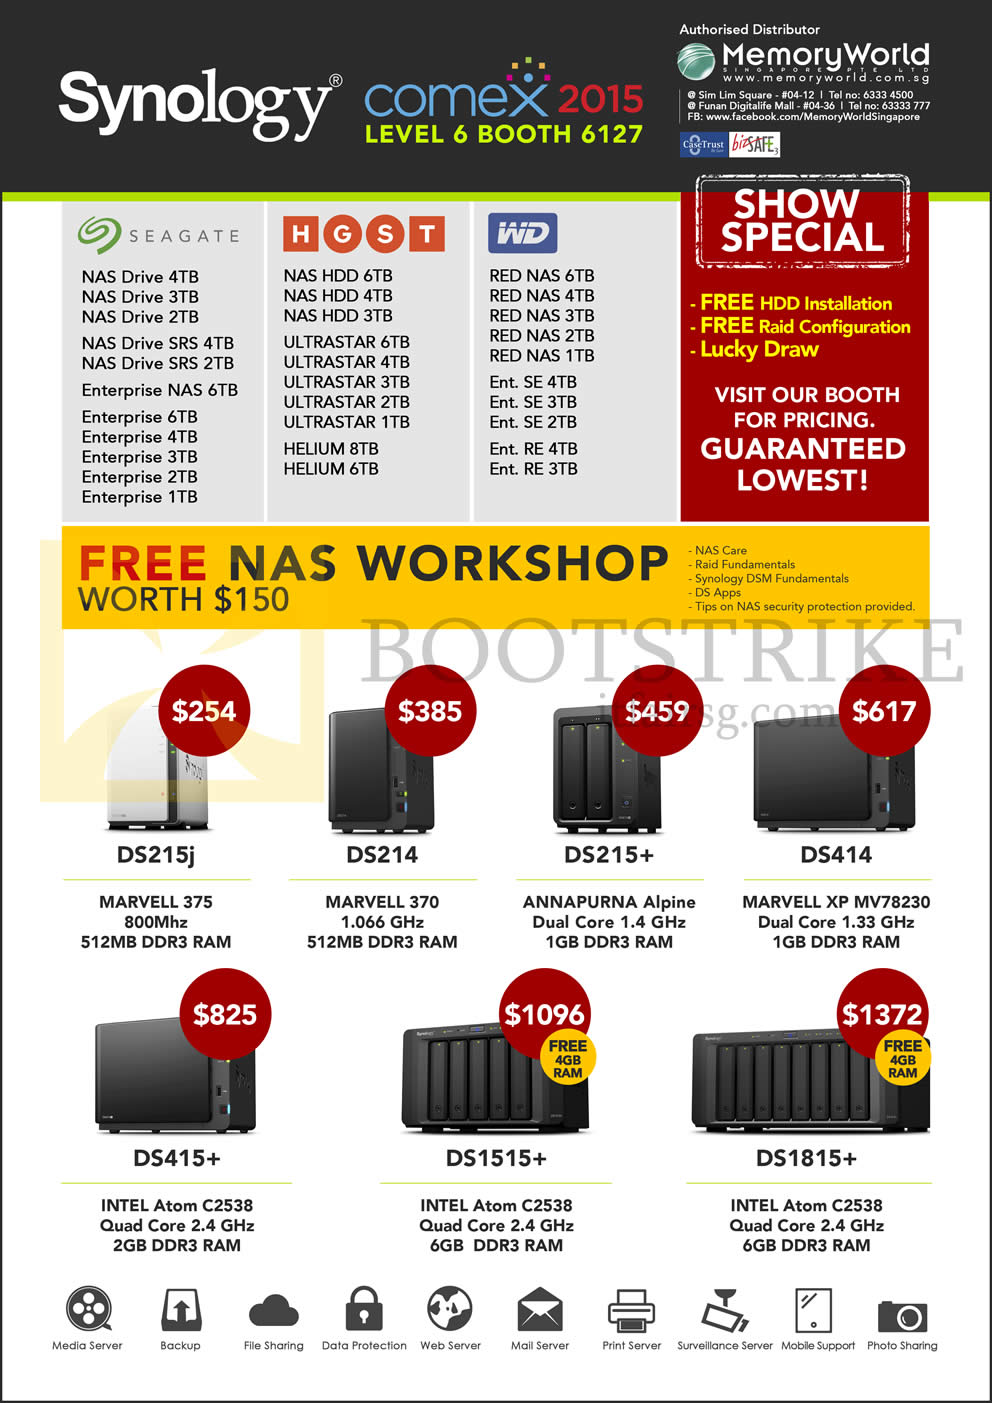 COMEX 2015 price list image brochure of Memory World Synology NAS Seagate. HGST, WD, DS215j, DS214, DS215Plus, DS414, DS415 Plus, DS1515Plus, DS1815 Plus